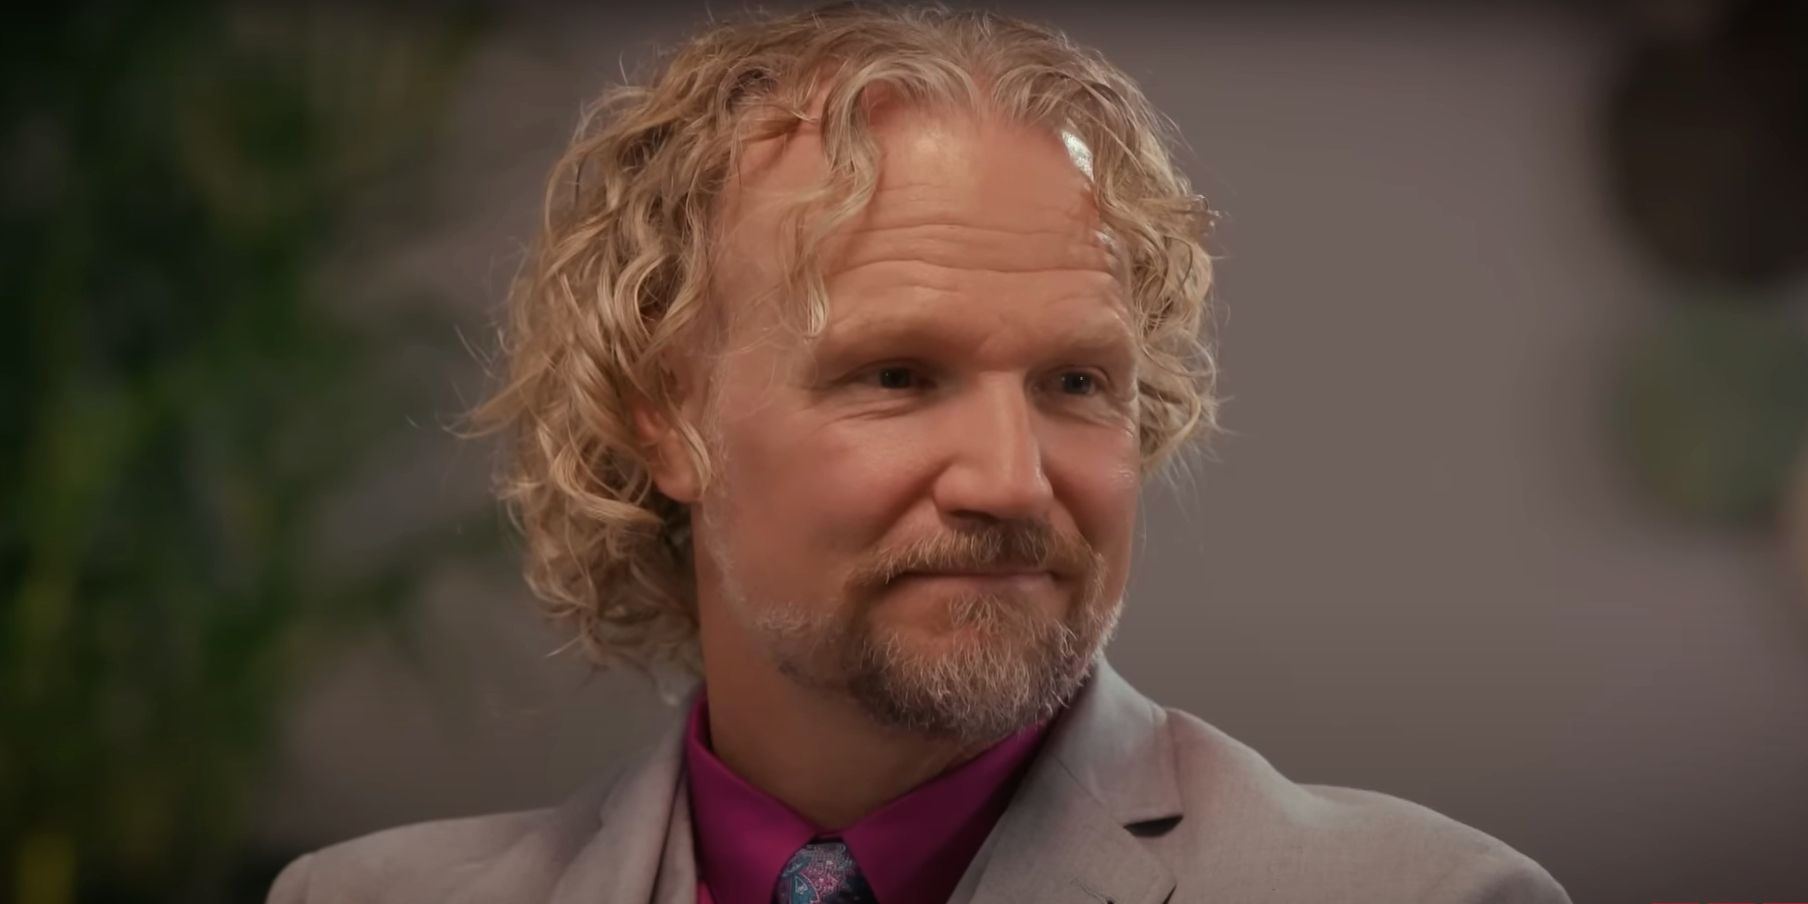 Sister Wives star Kody Brown wearing suit looking serious during season 17 Tell All